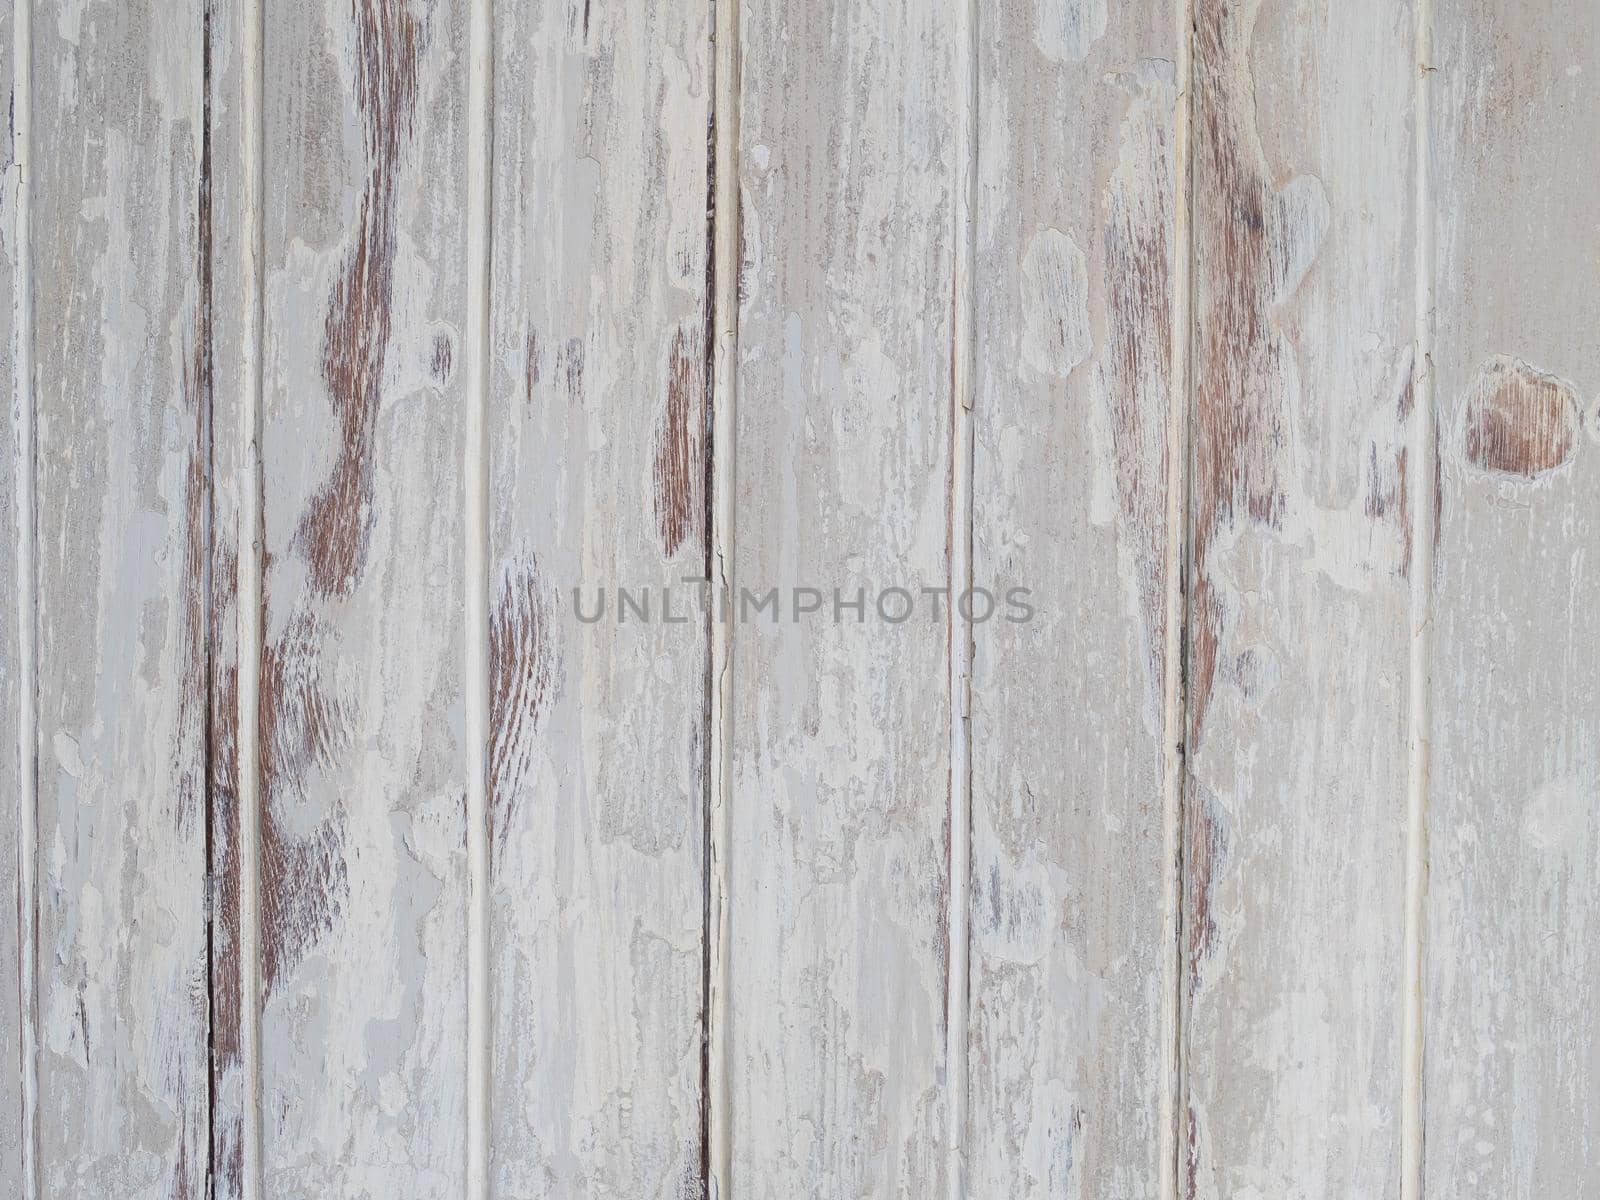 White Wood Backdrop Rustic Old Weathered Peeled Vintage Retro White Painted Grey Wooden Planks Wall